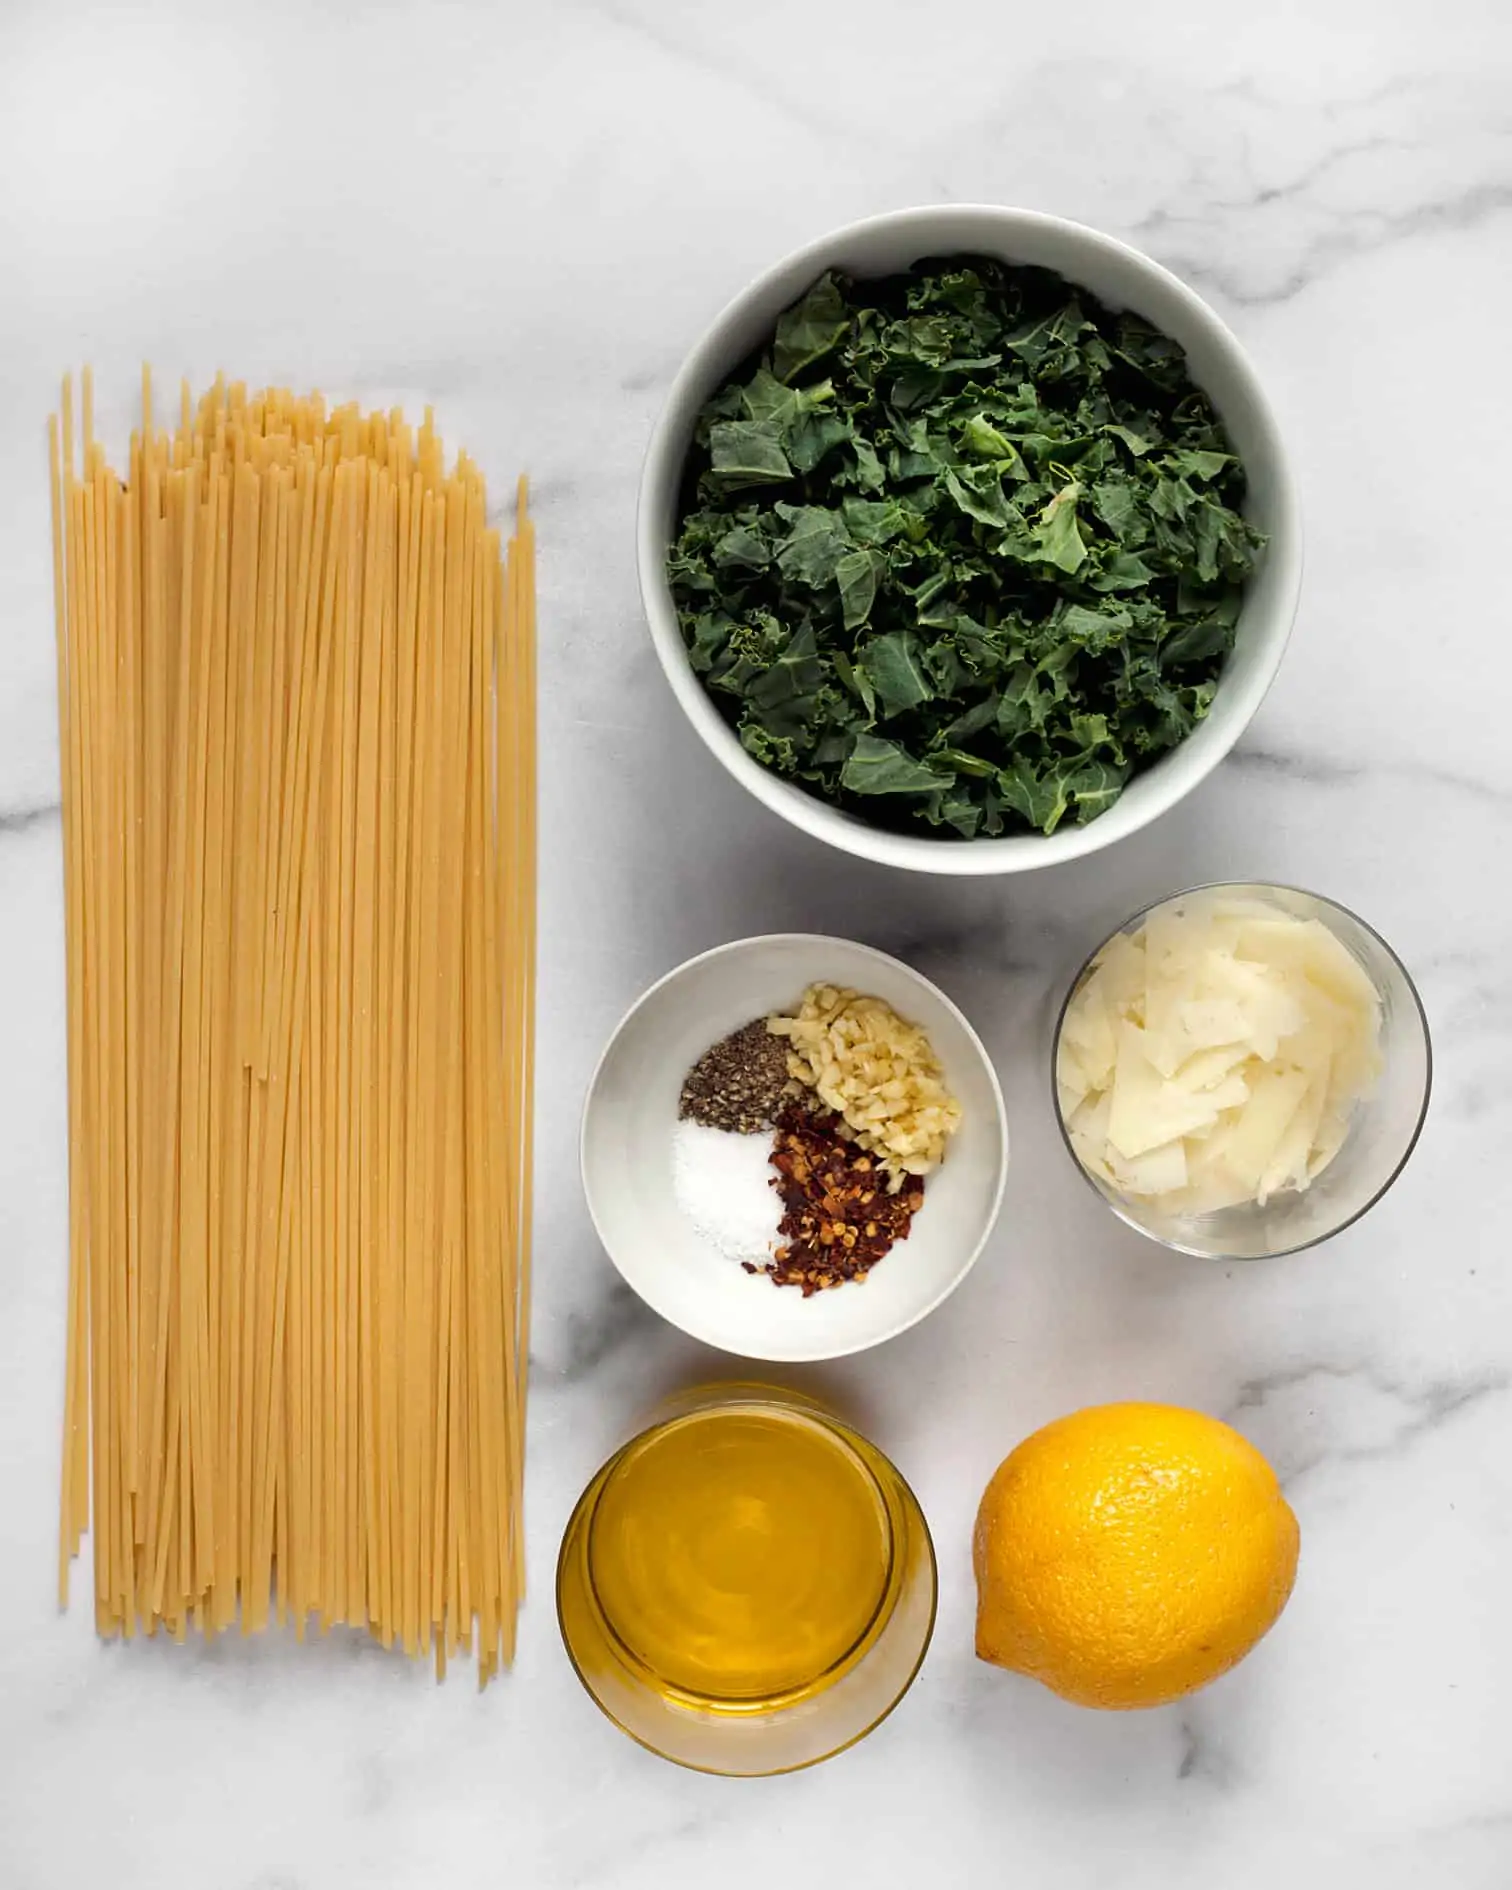 Ingredients including spaghetti, kale, lemon, garlic, olive oil and spices